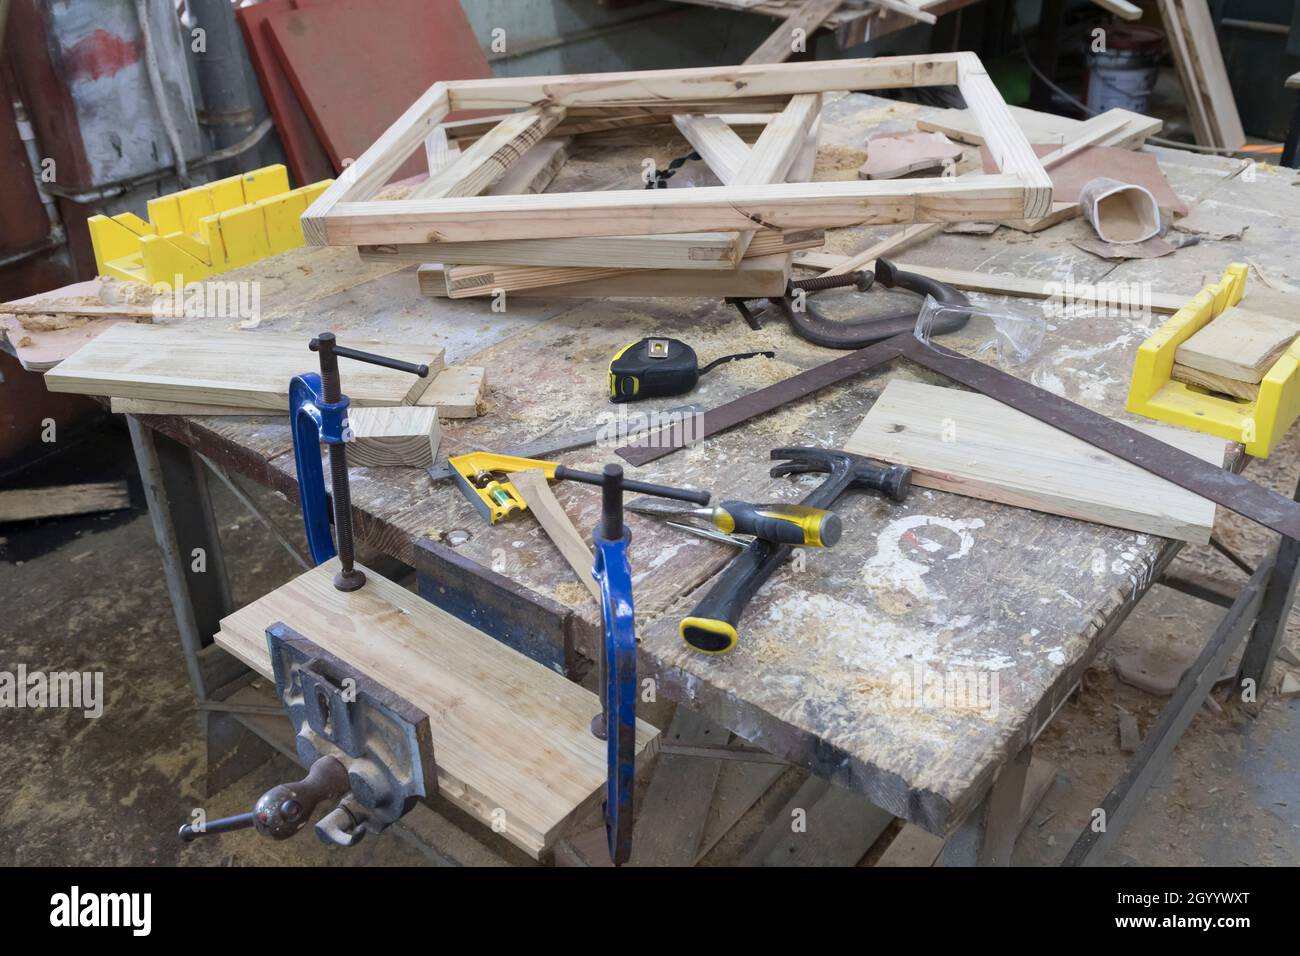 carpenter's workbench cluttered with workpieces and tools Stock Photo